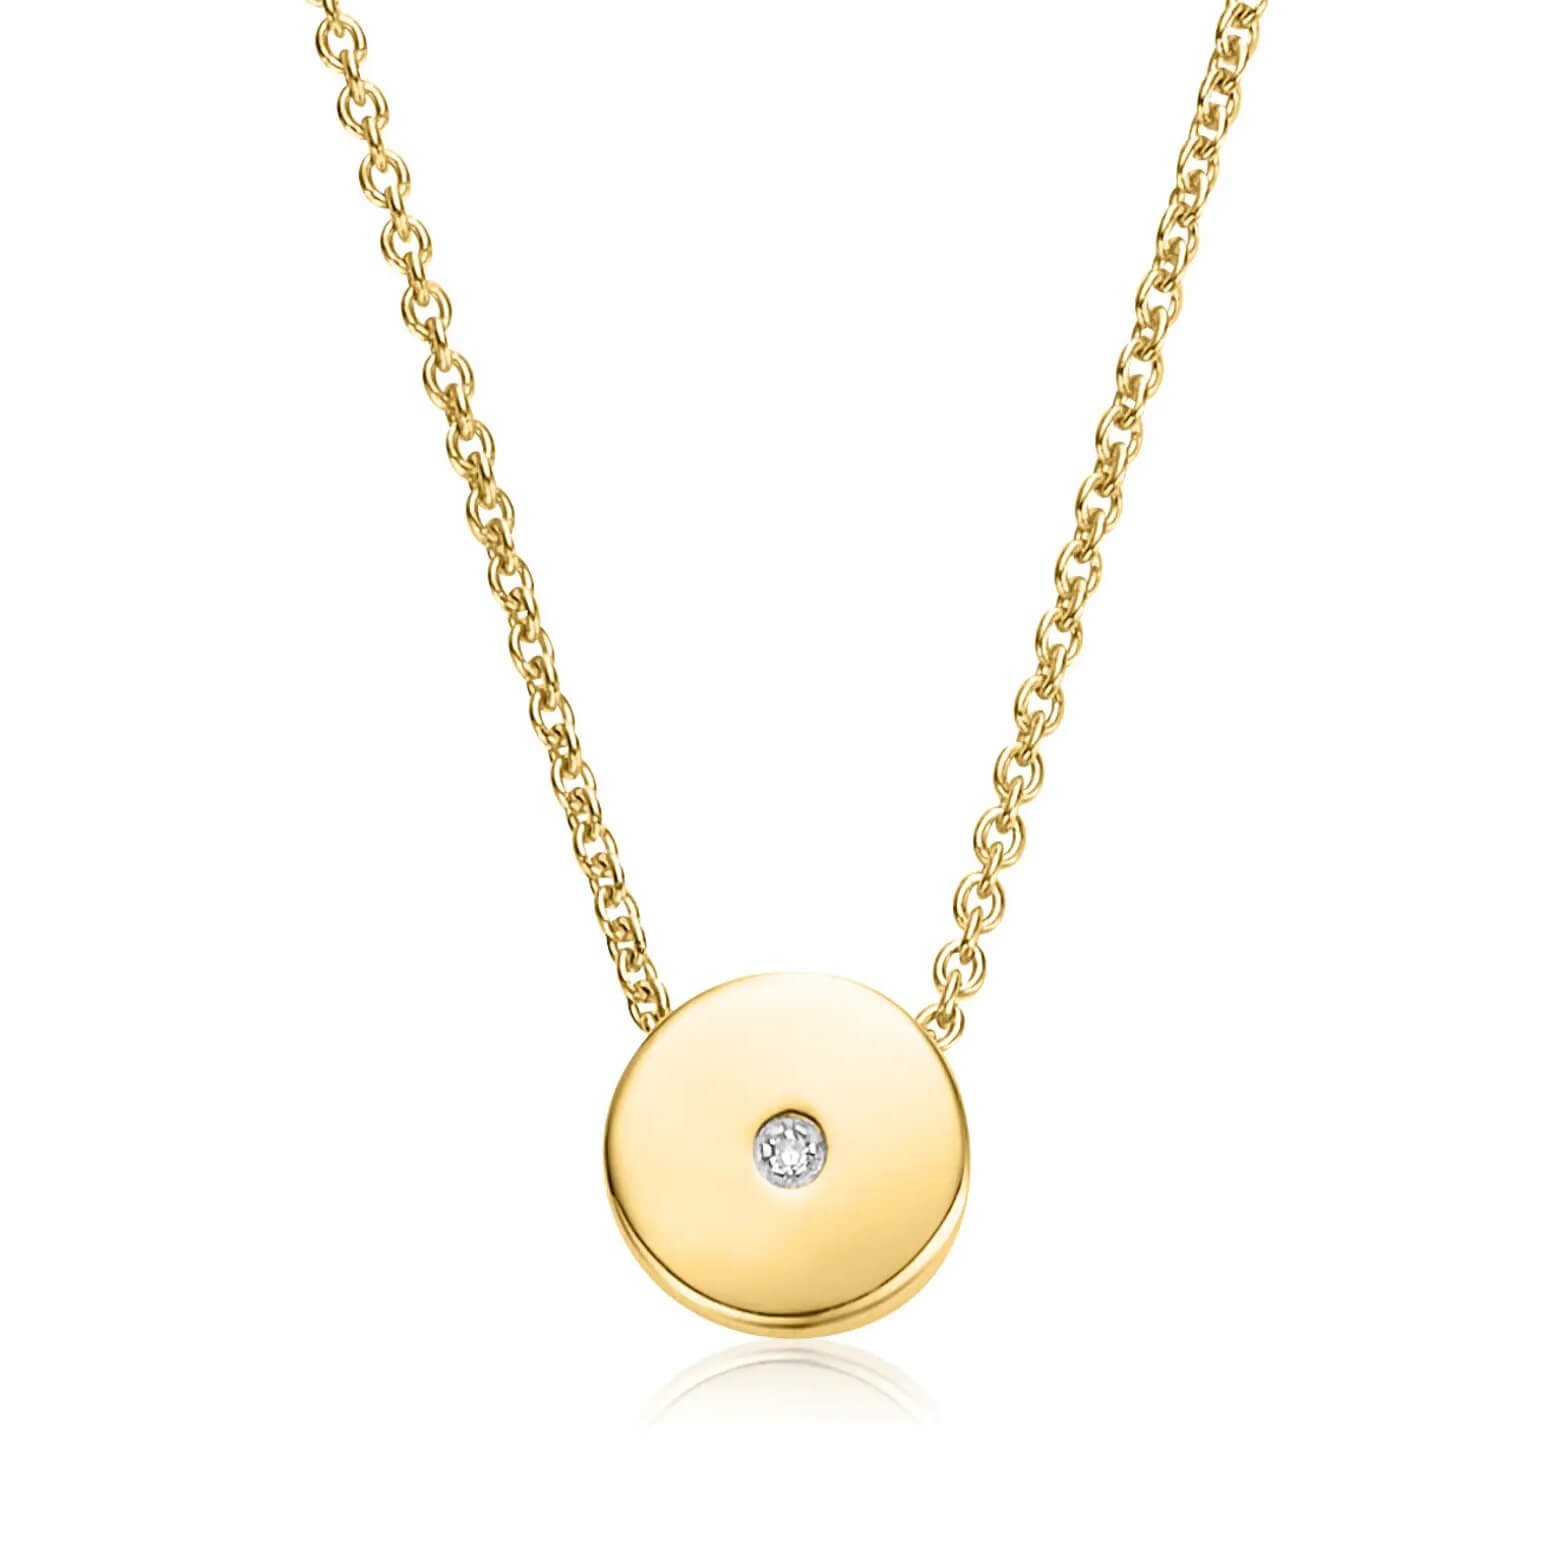 Monica Vinader “Linear Solo” necklace with diamond, $195 at Nordstrom